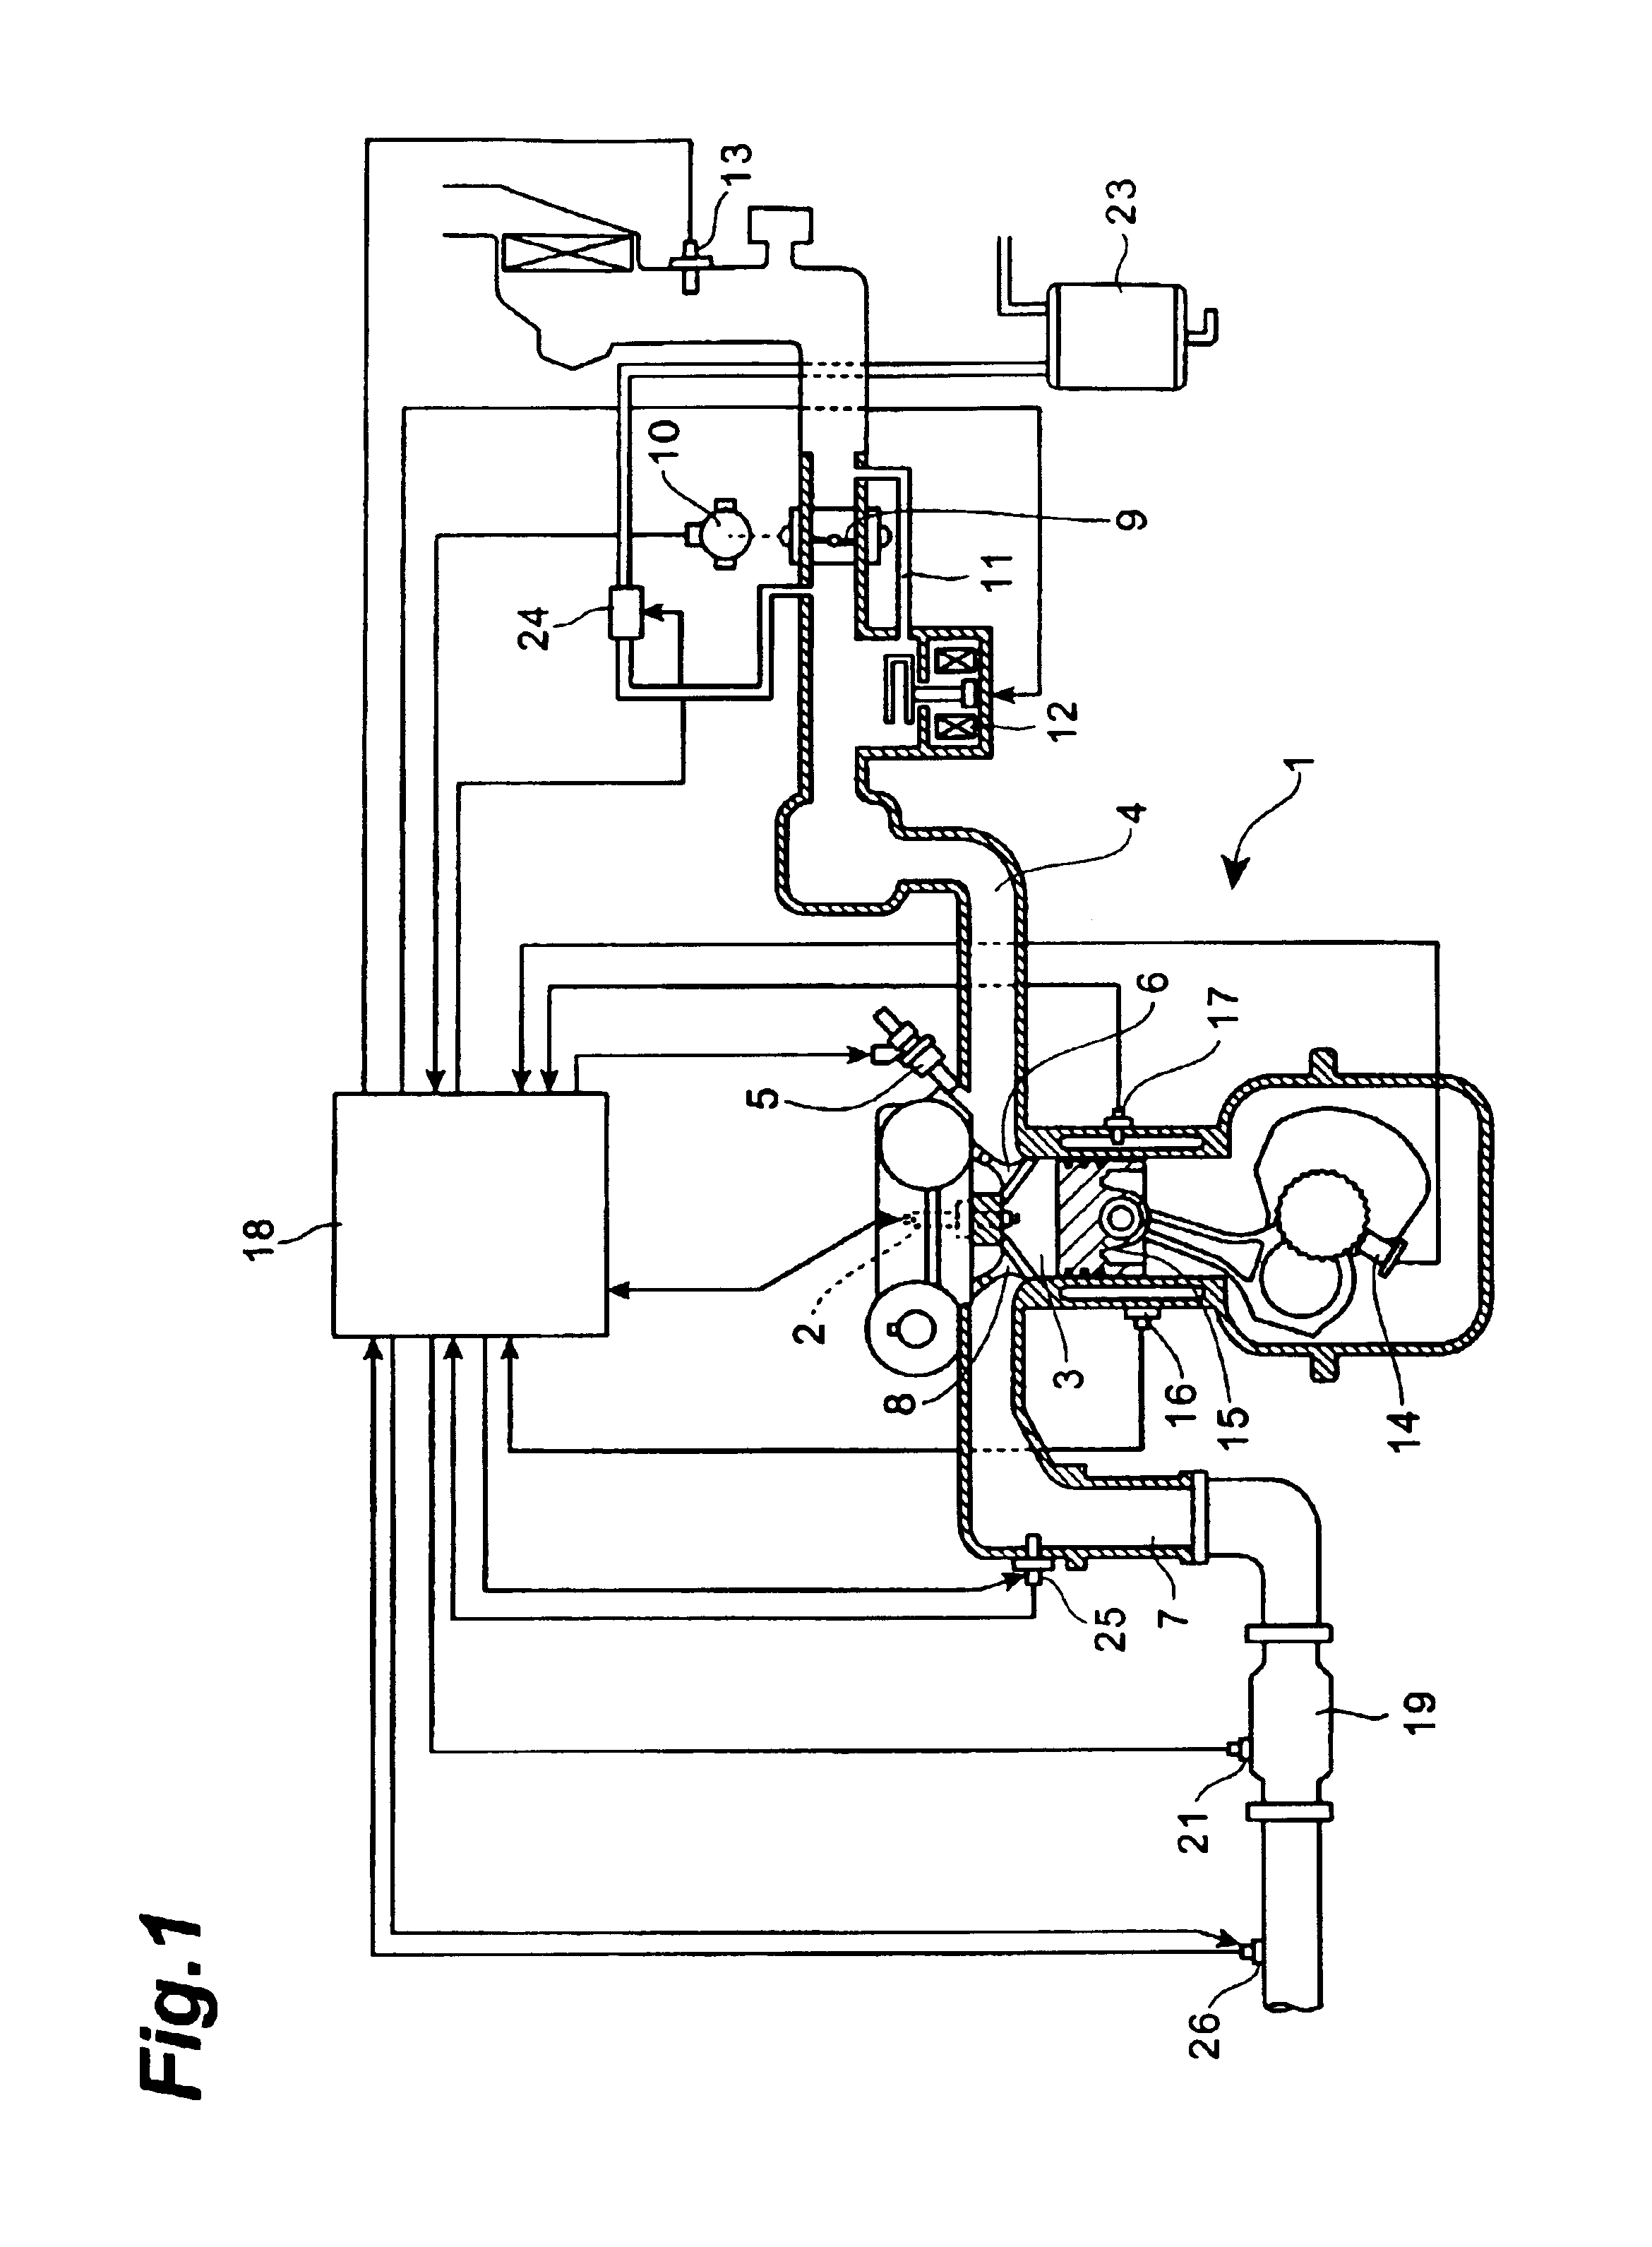 Air-fuel ratio control apparatus of internal combustion engine